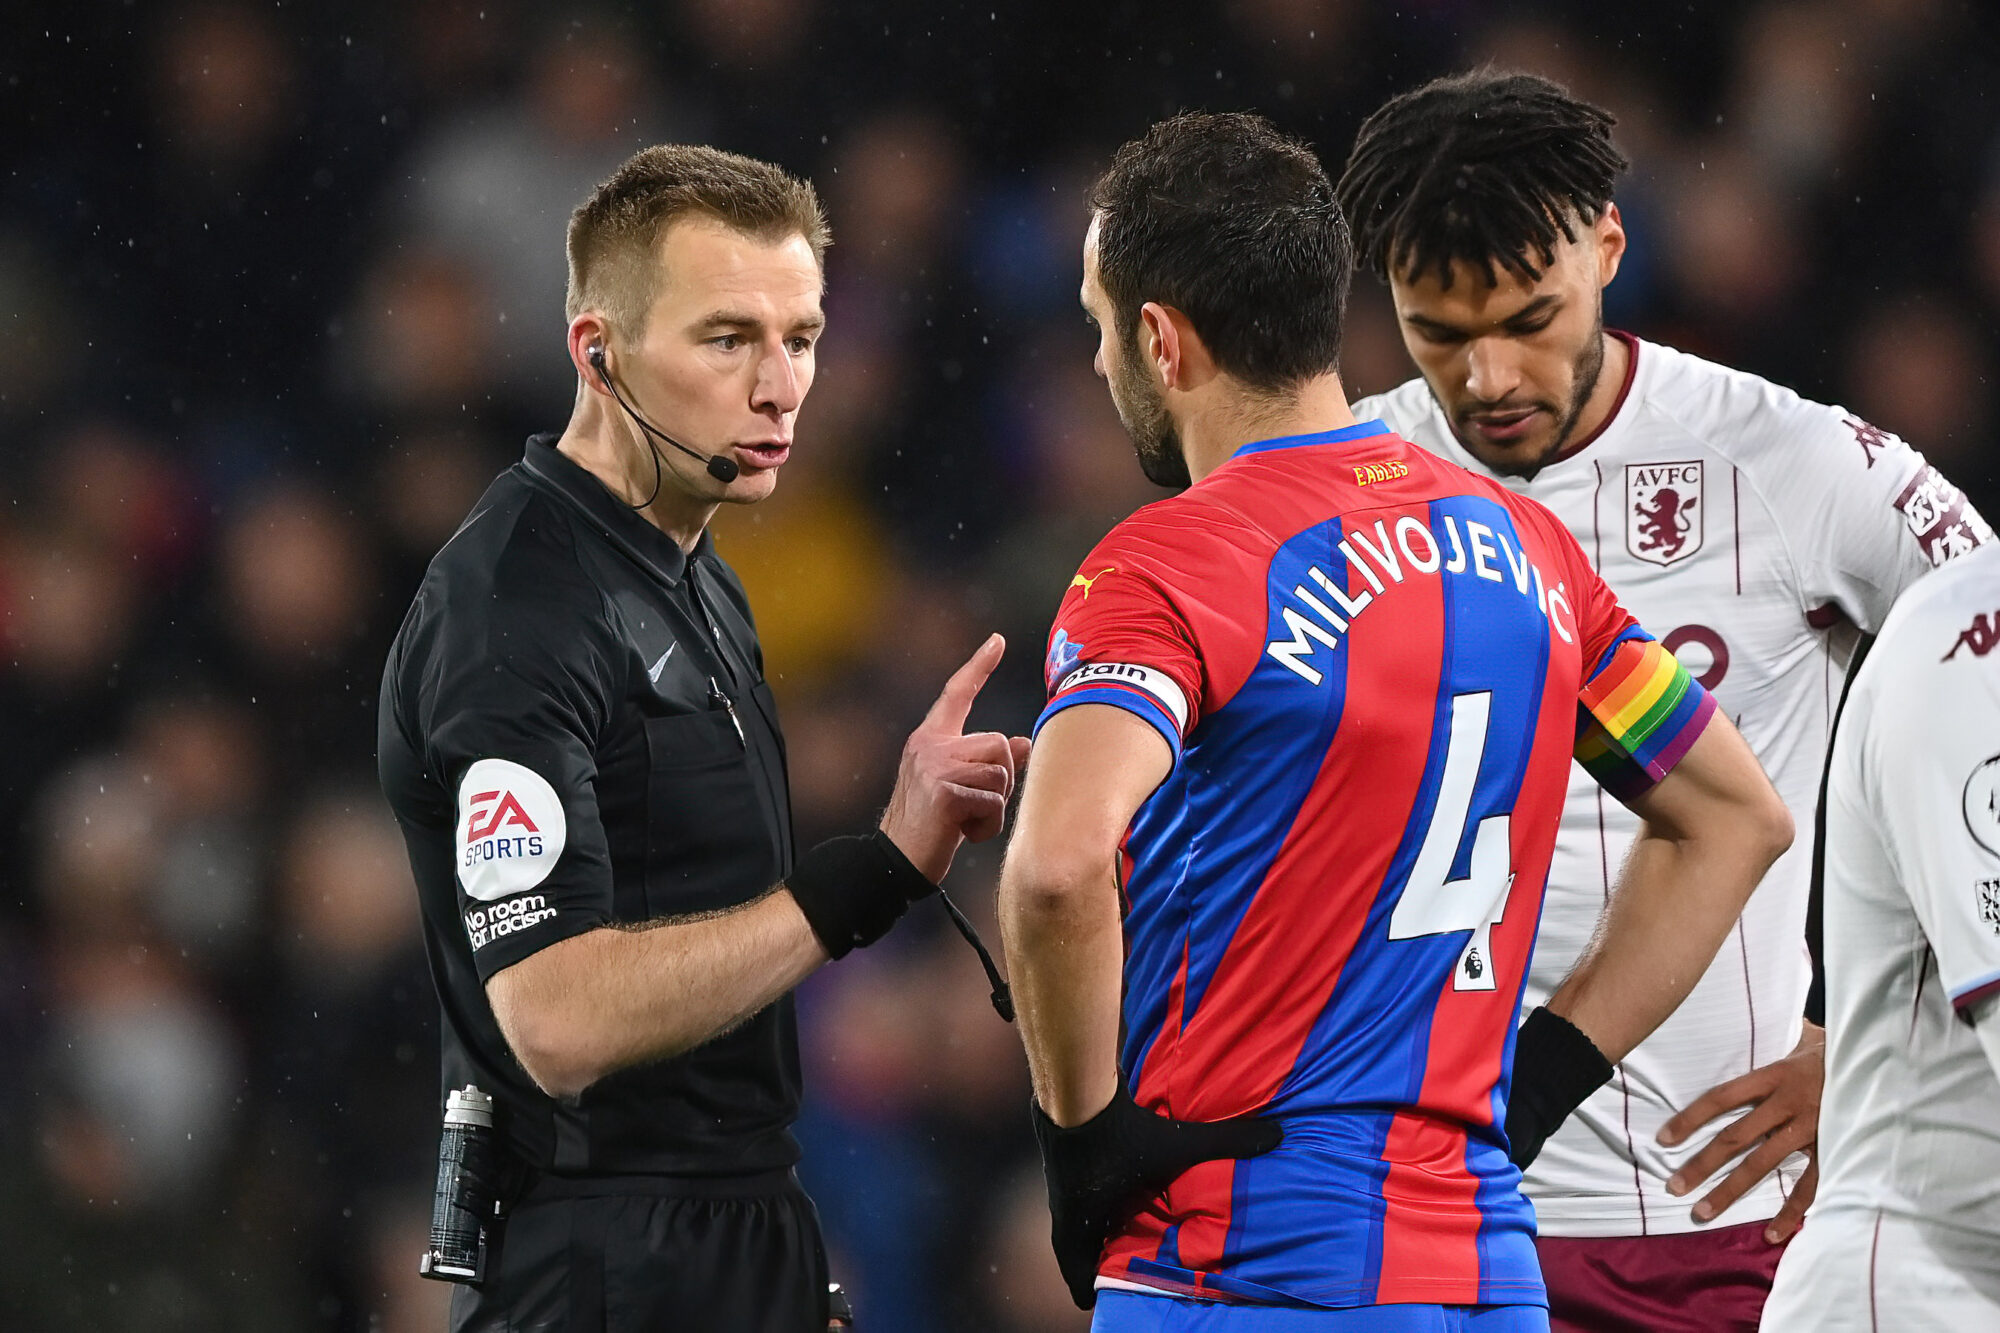 Crystal Palace and Aston Villa both hit with FA charges – South London News